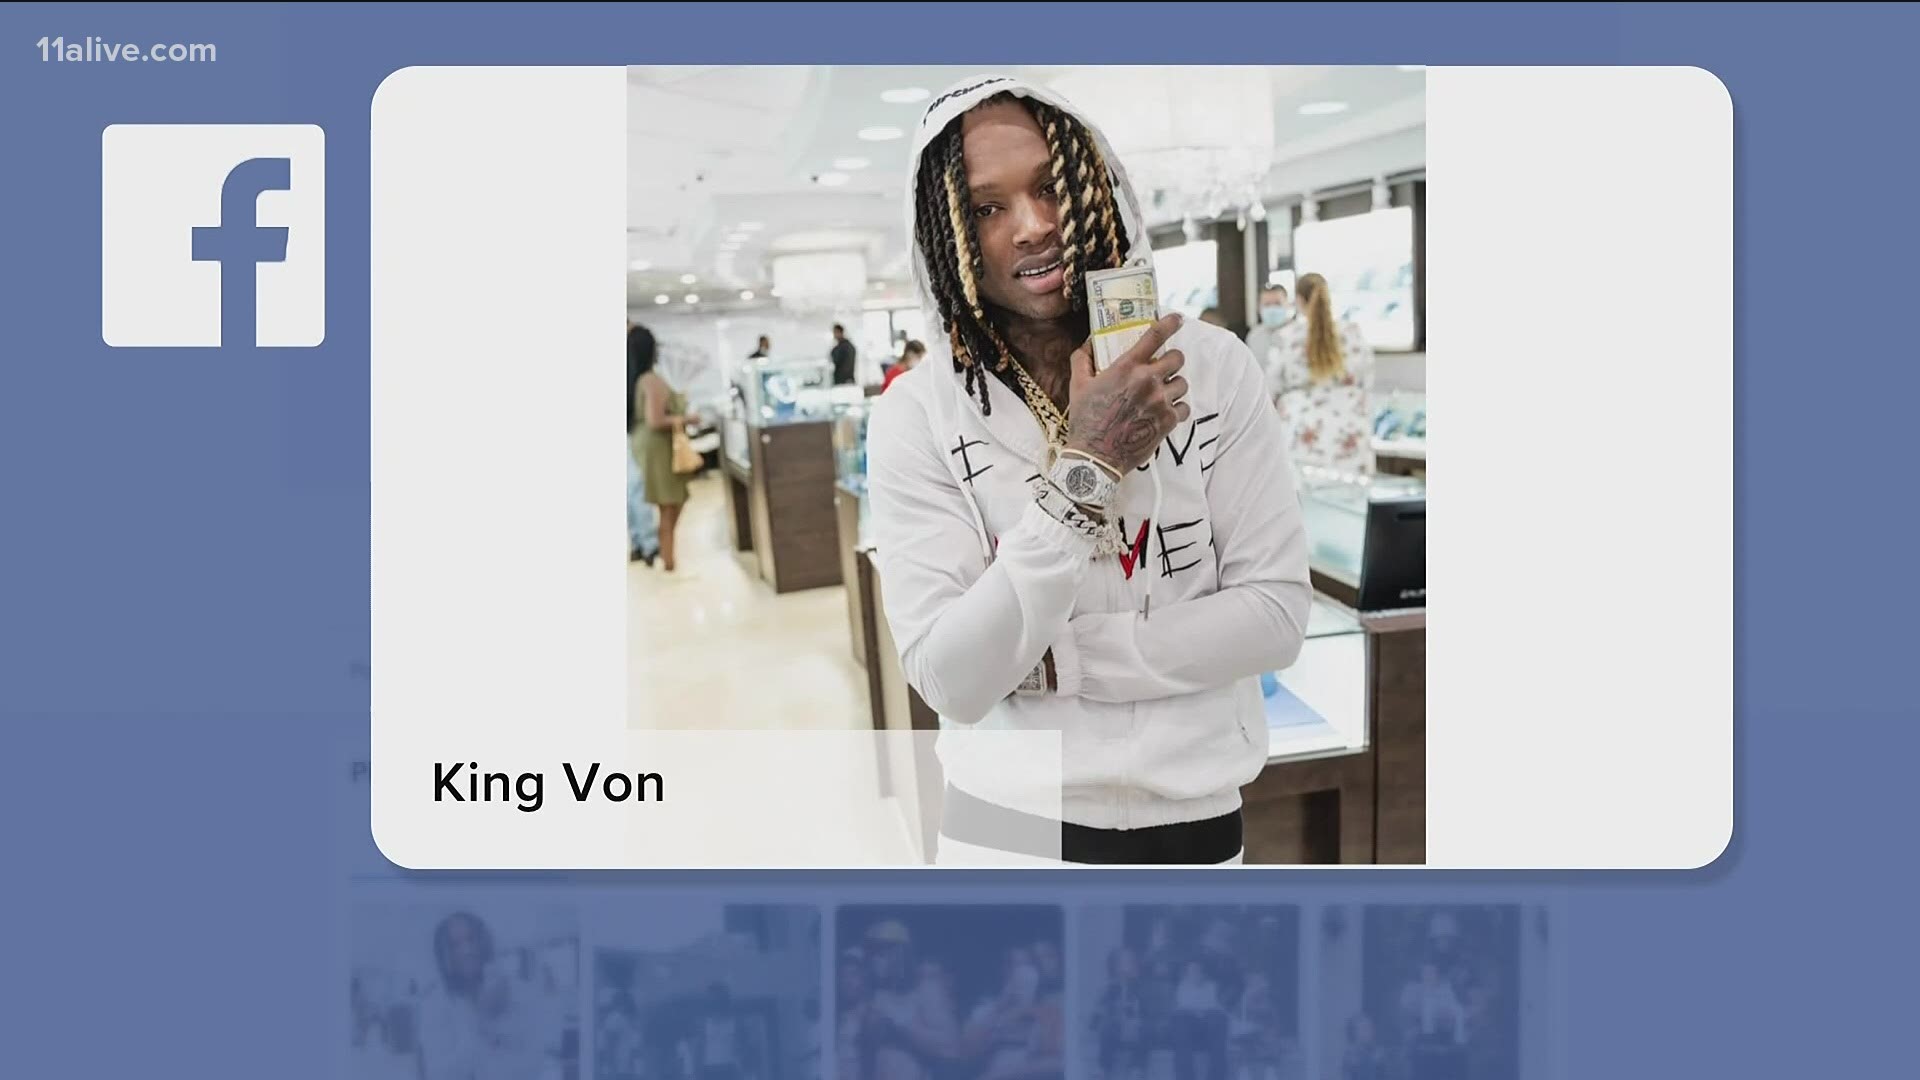 A shootout between two groups left rising Chicago rapper King Von and another person dead.